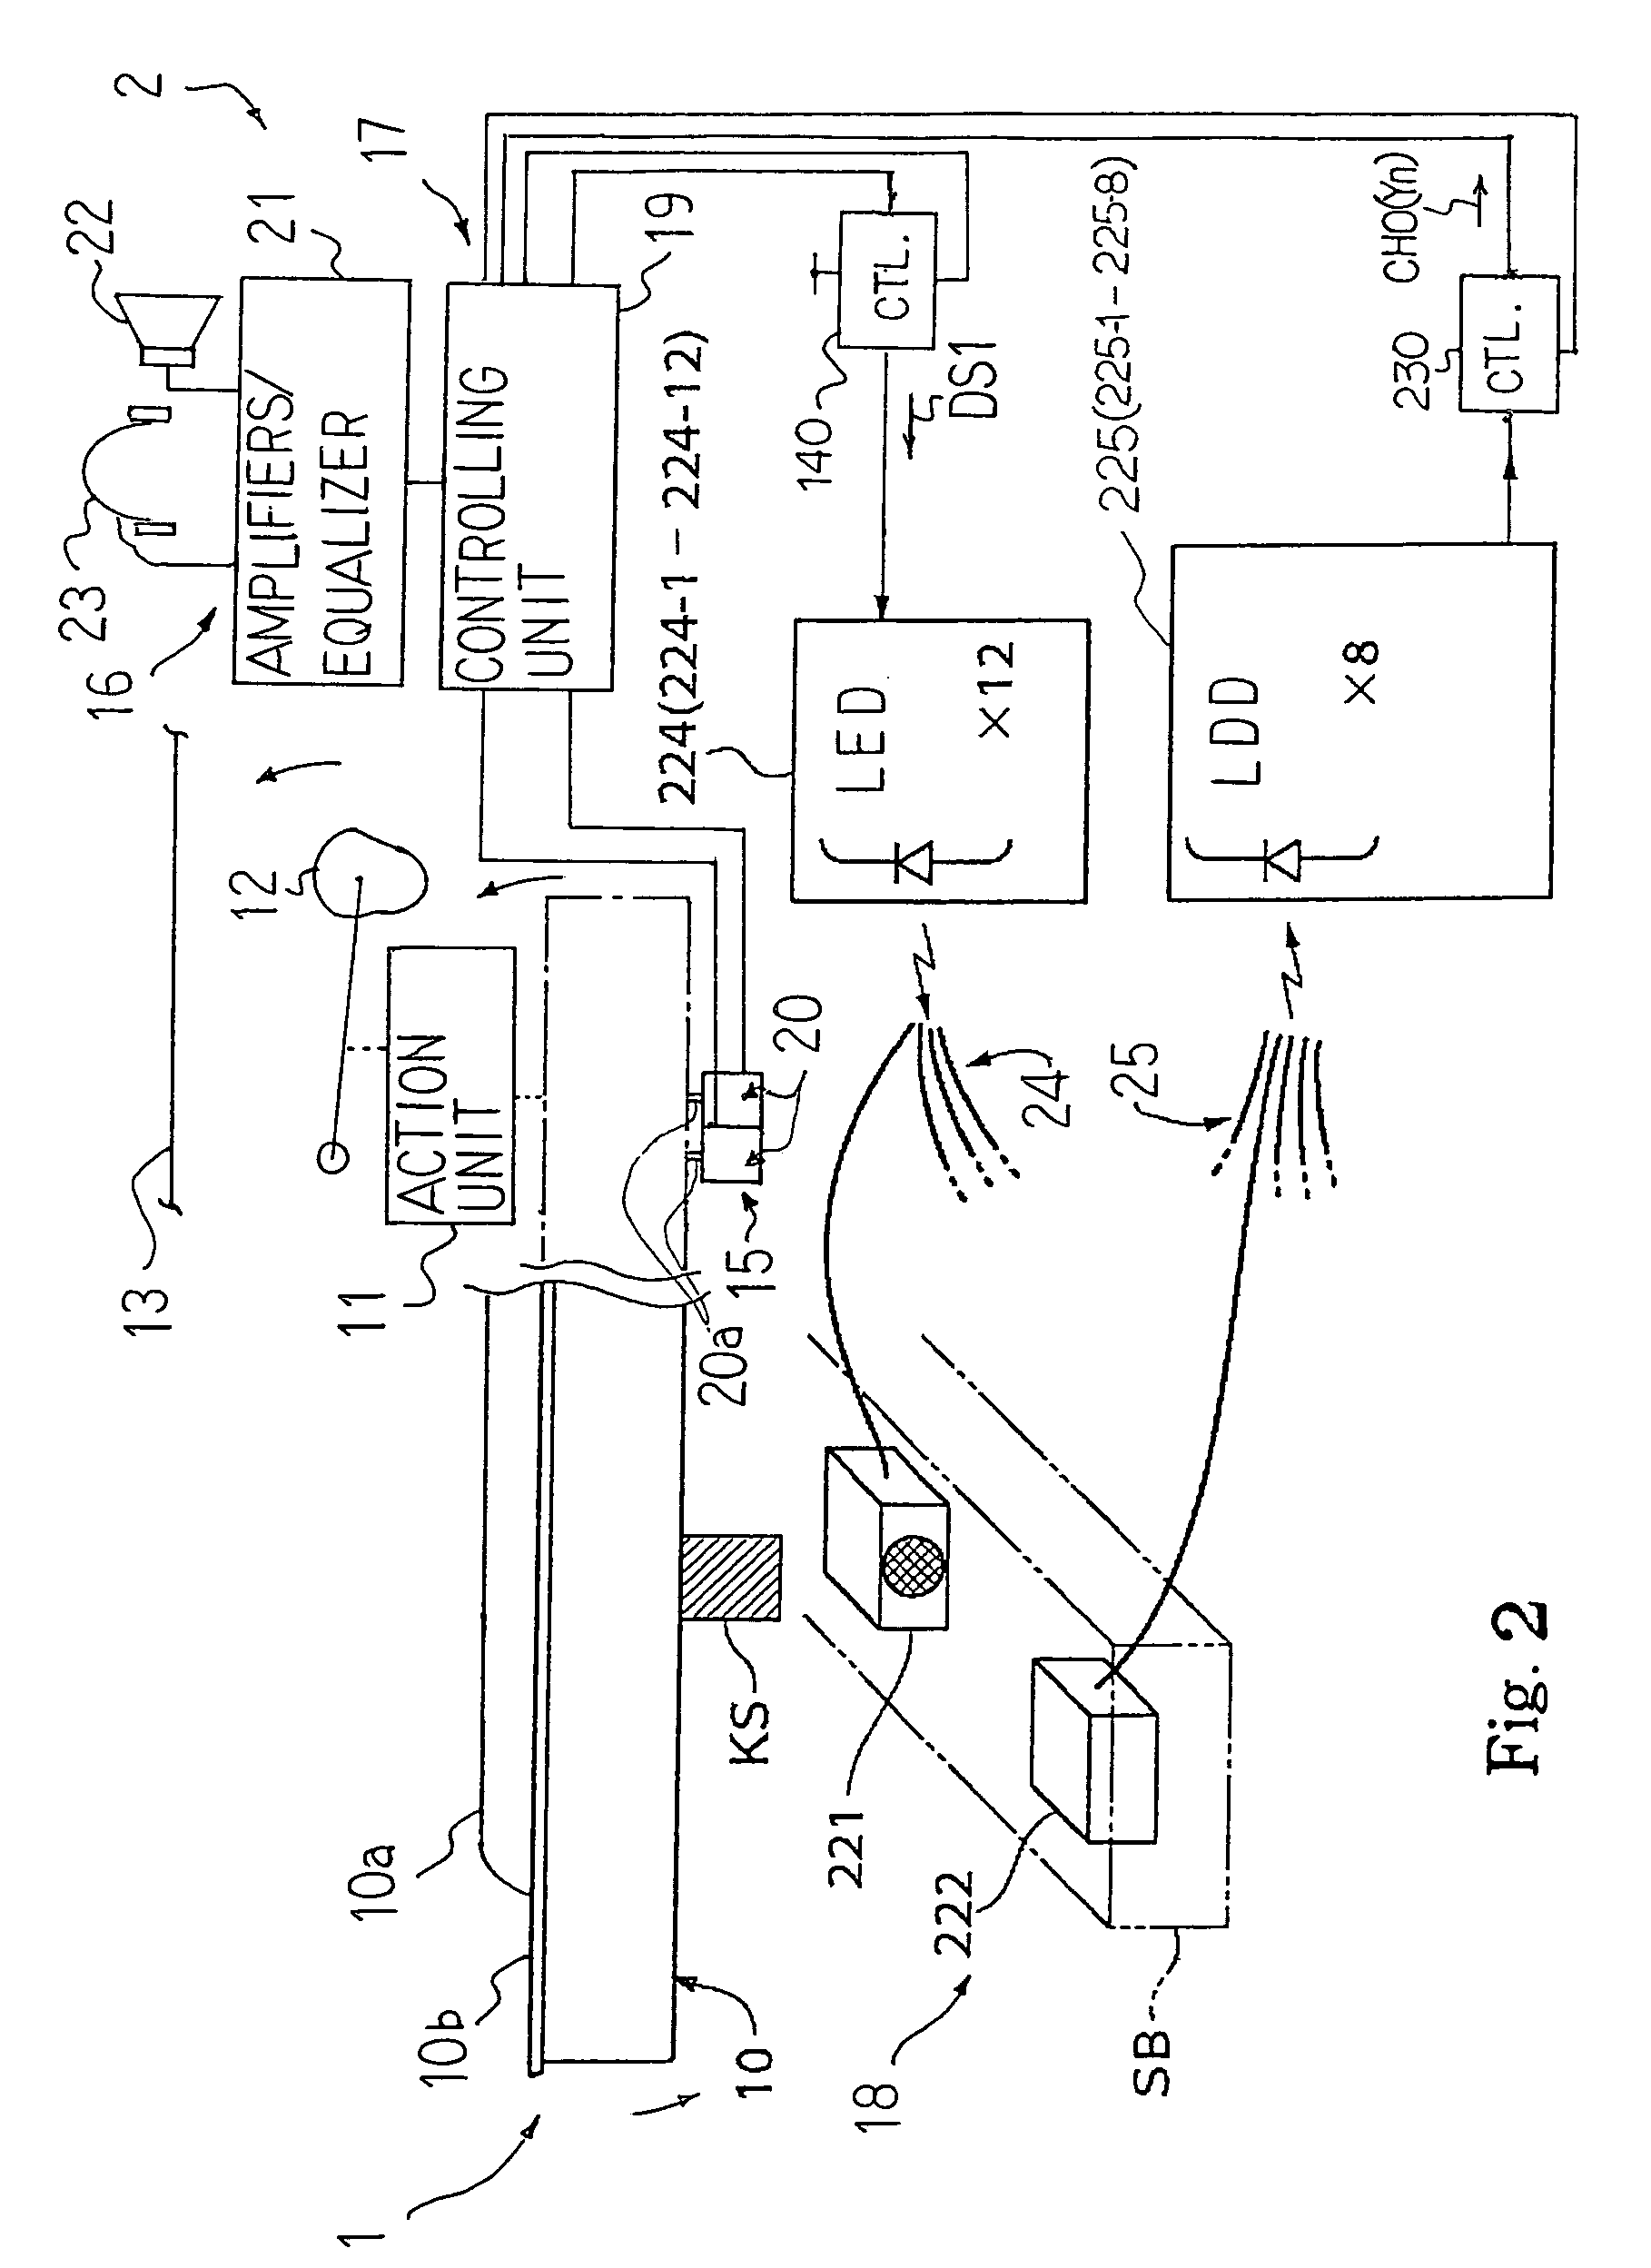 Optical transducer system having light emitting elements and light detecting elements both regulable in output characteristics